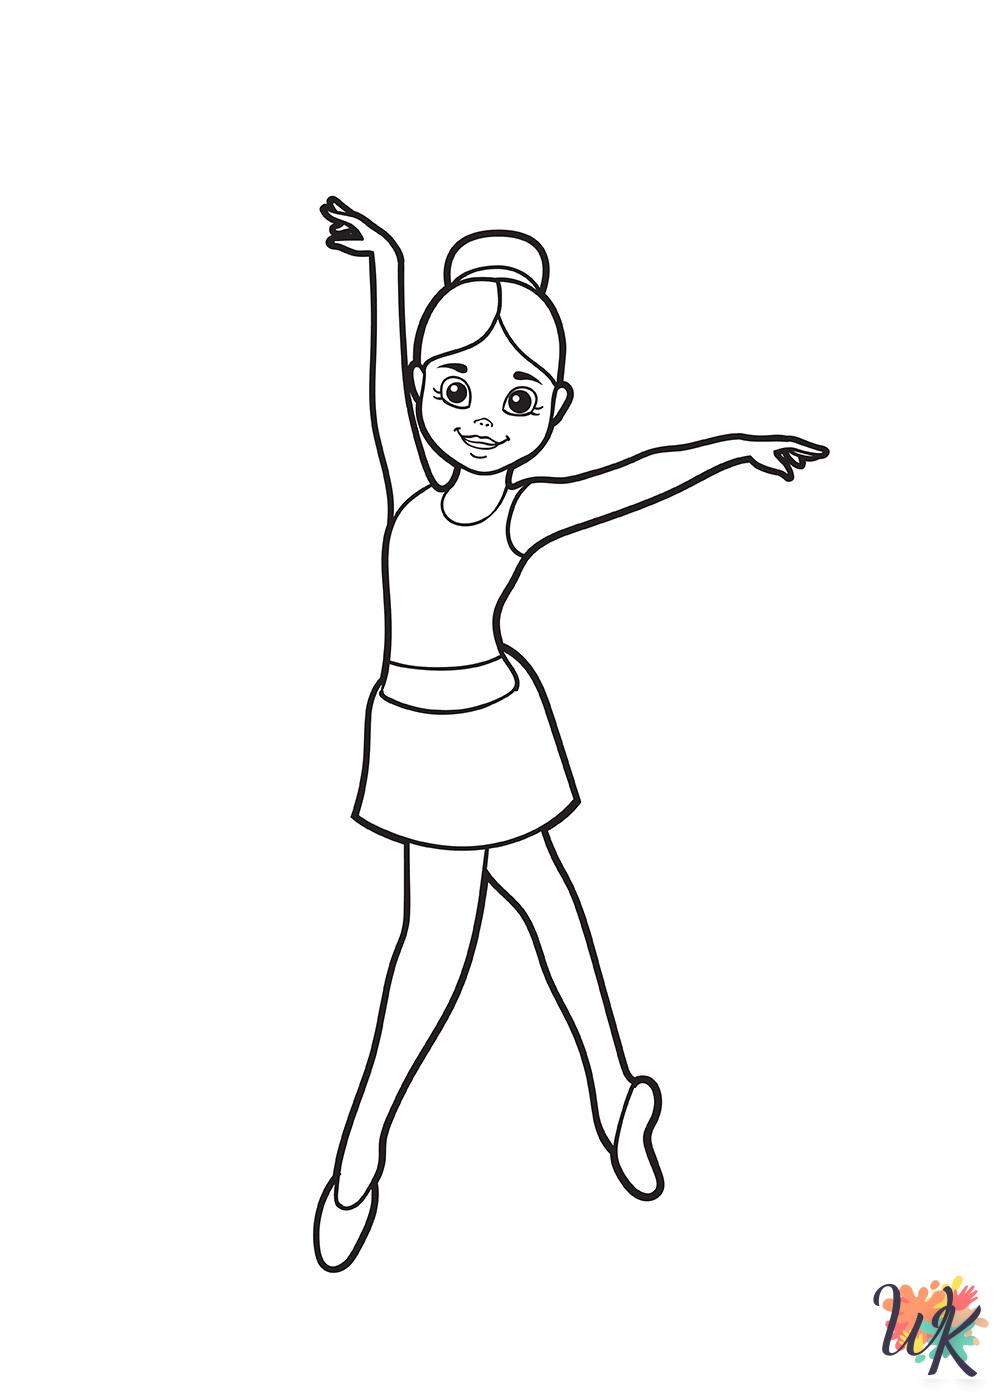 Ballerina Coloring Pages 3